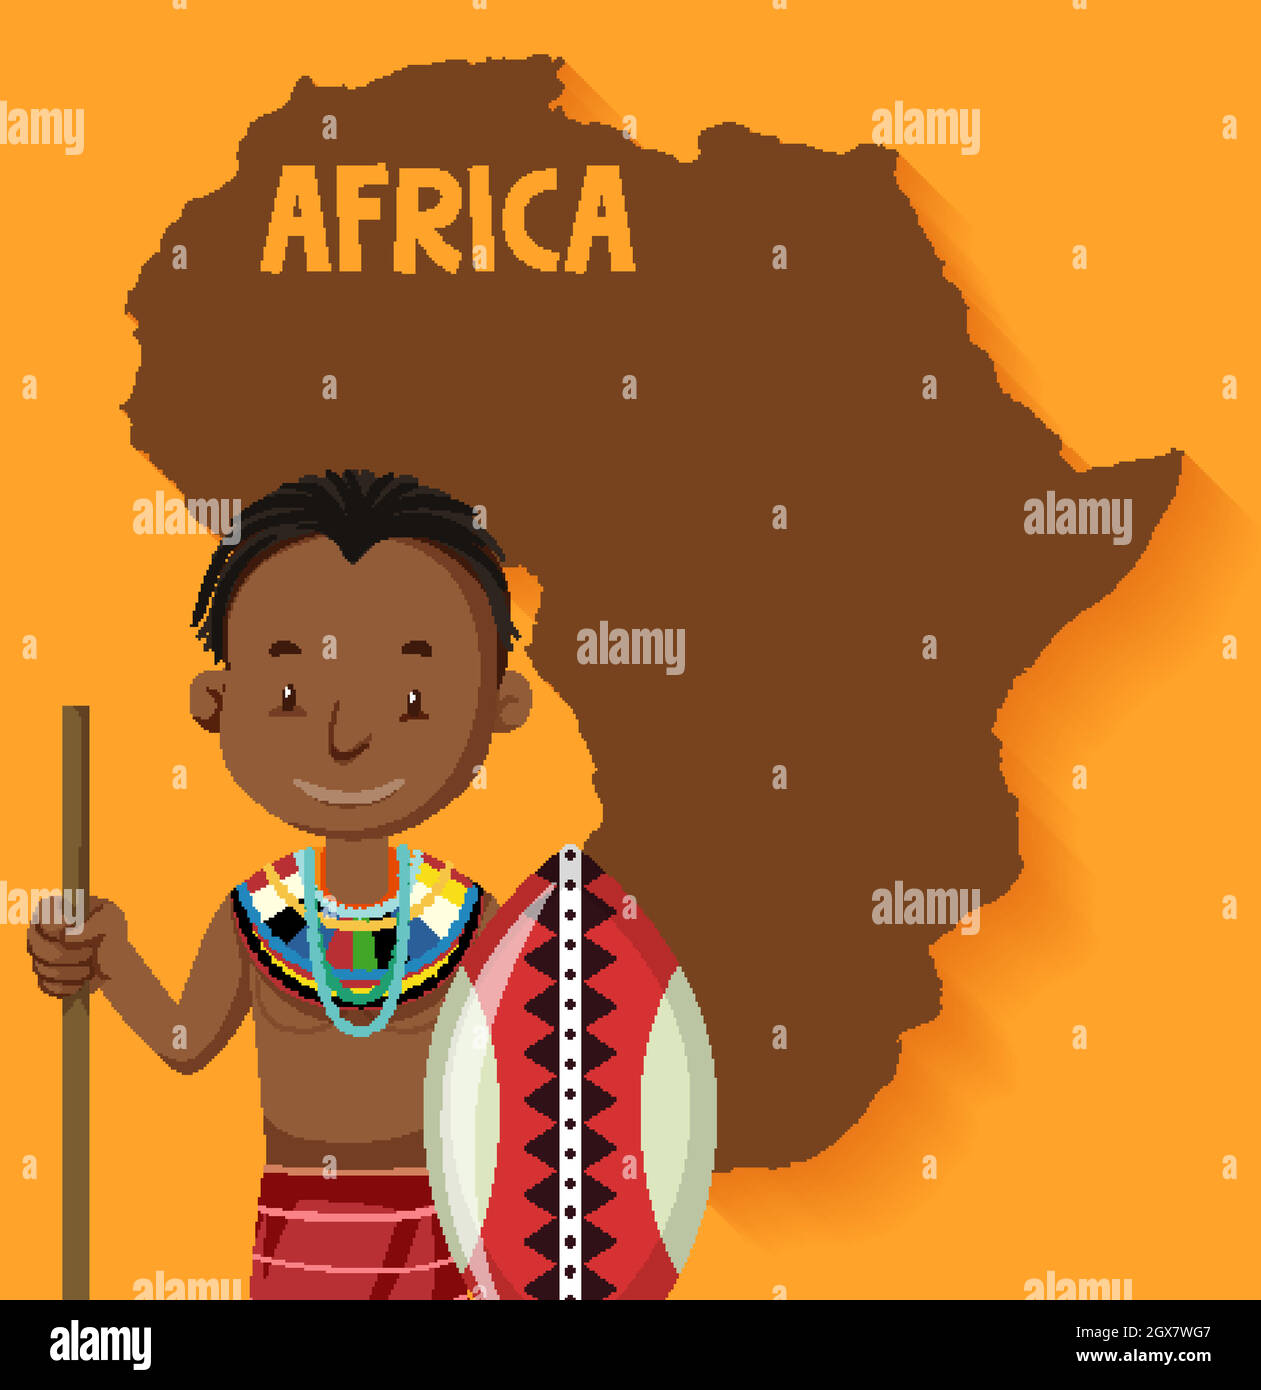 Native african tribes with map on the background Stock Vector